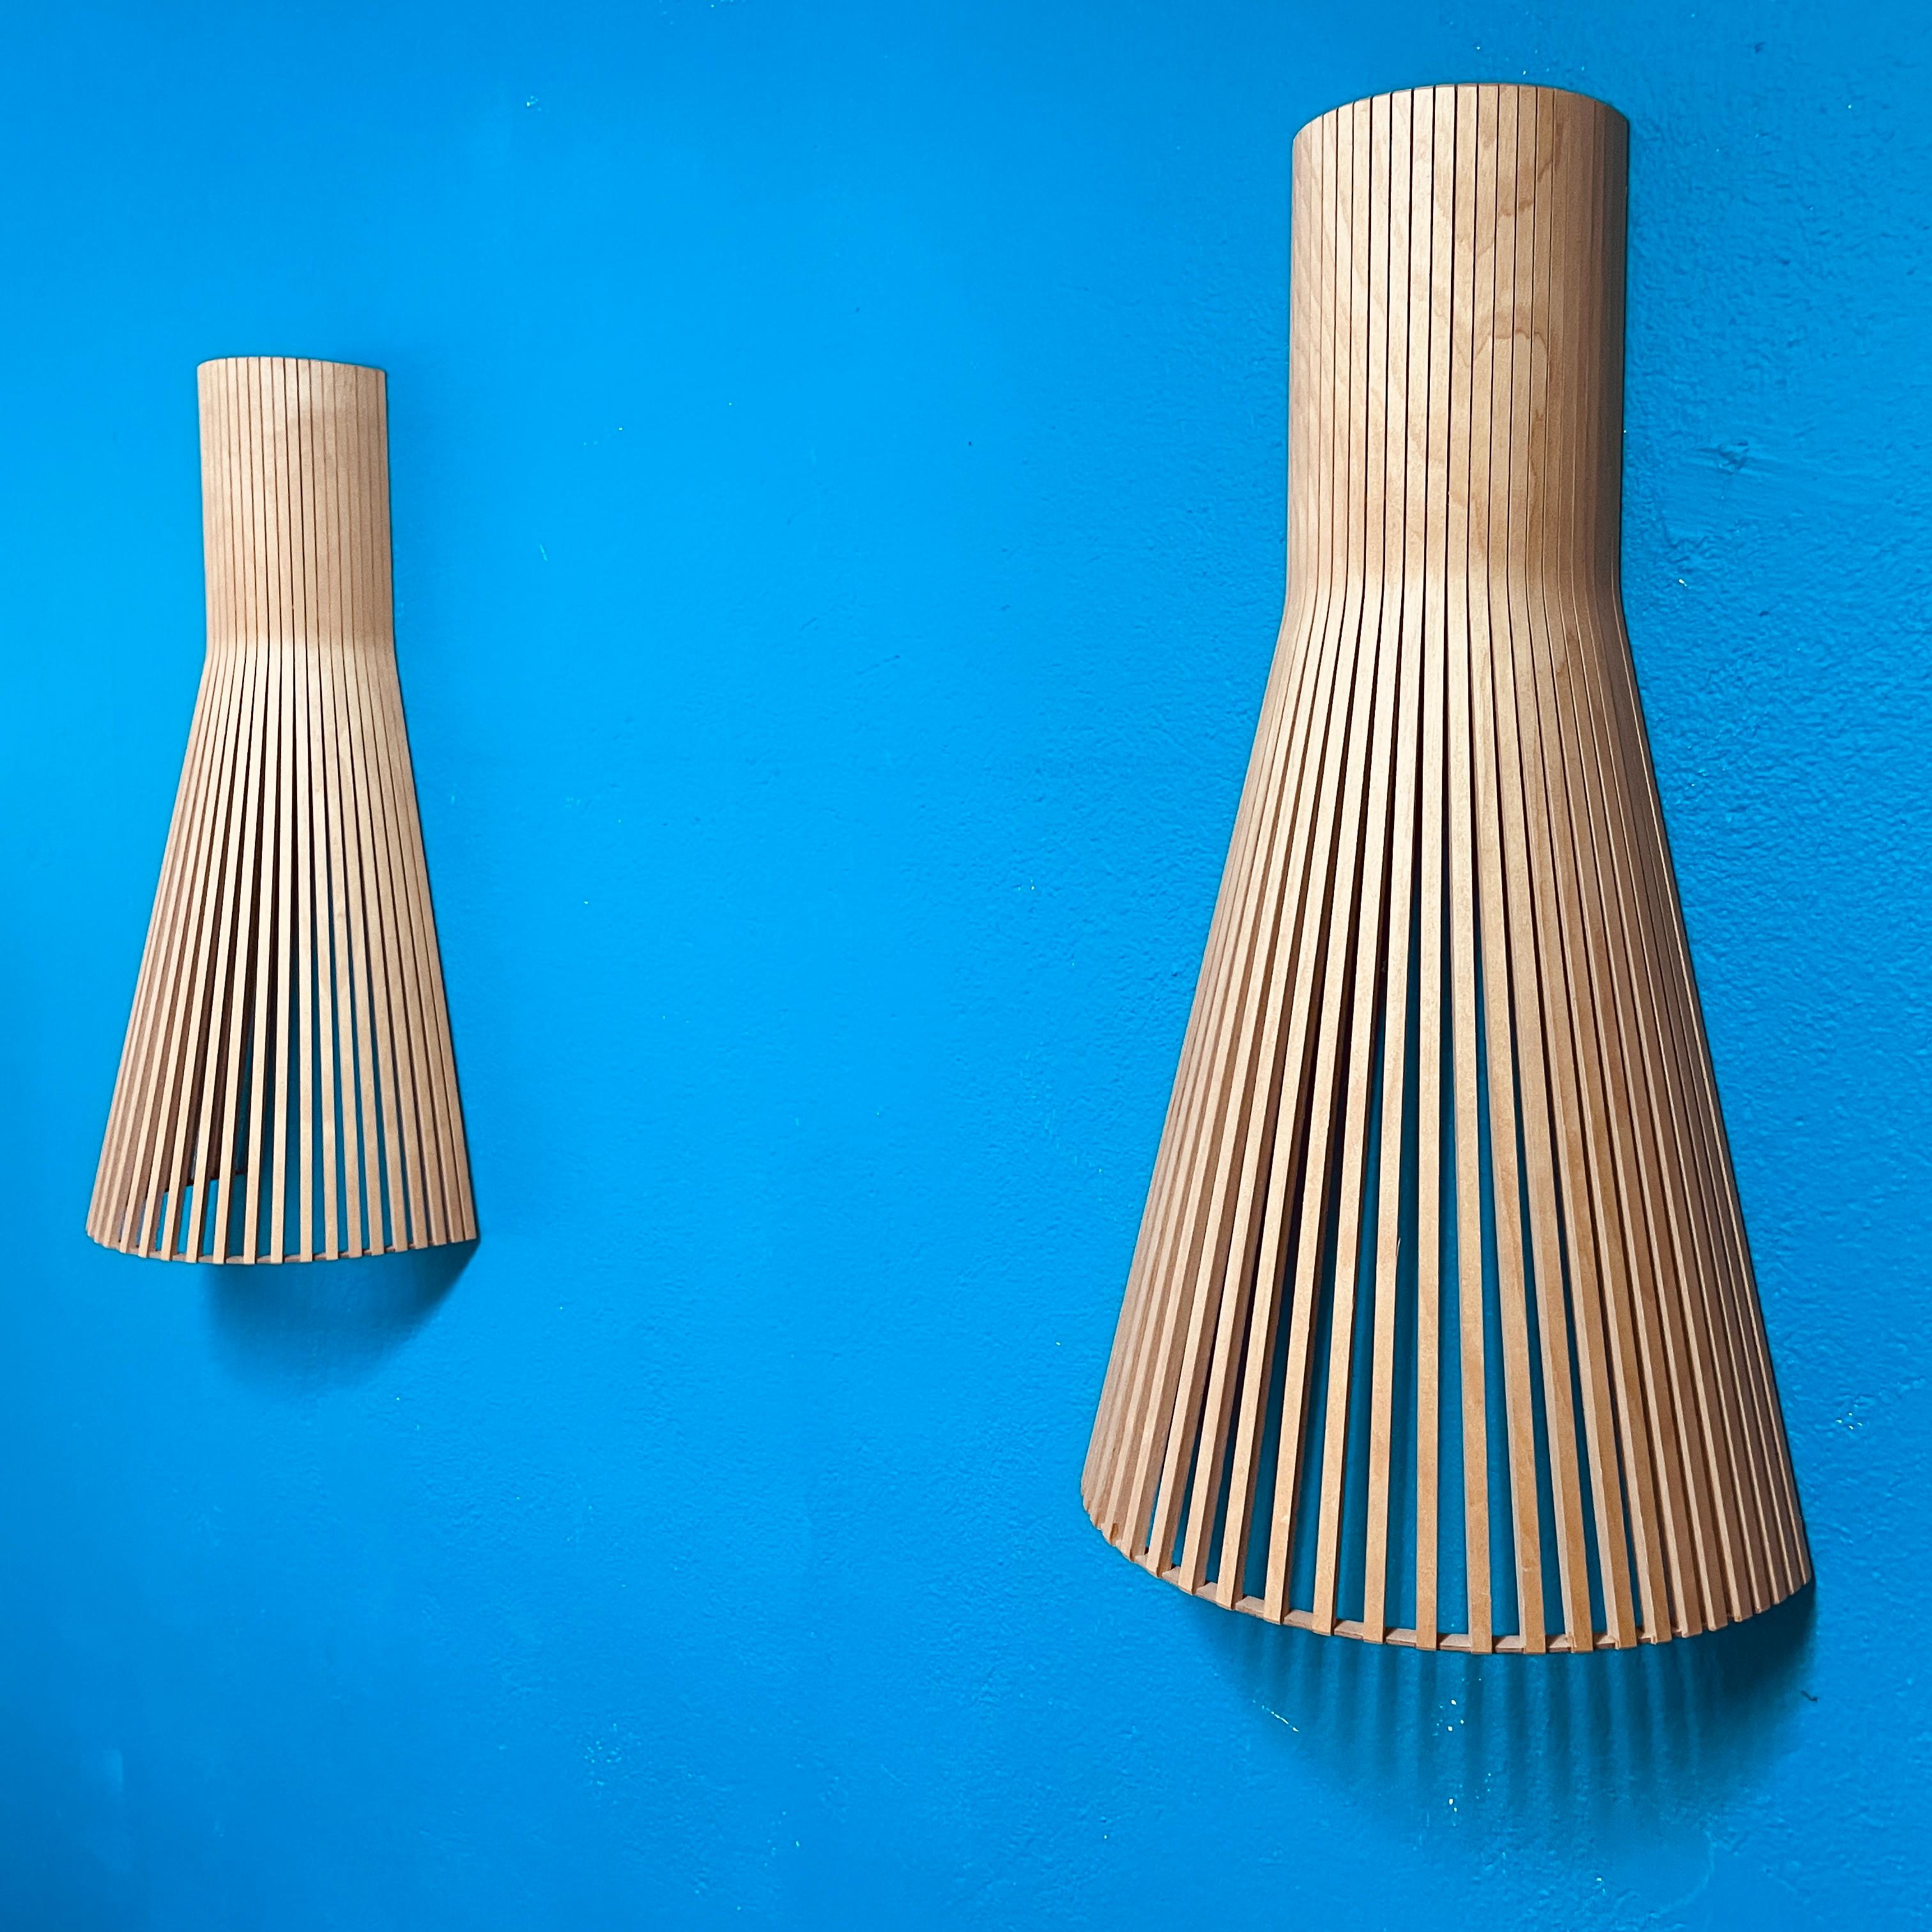 Scandinavian Modern Pair of Wooden Secto 4230 Wall Lamps by Secto Design Finland